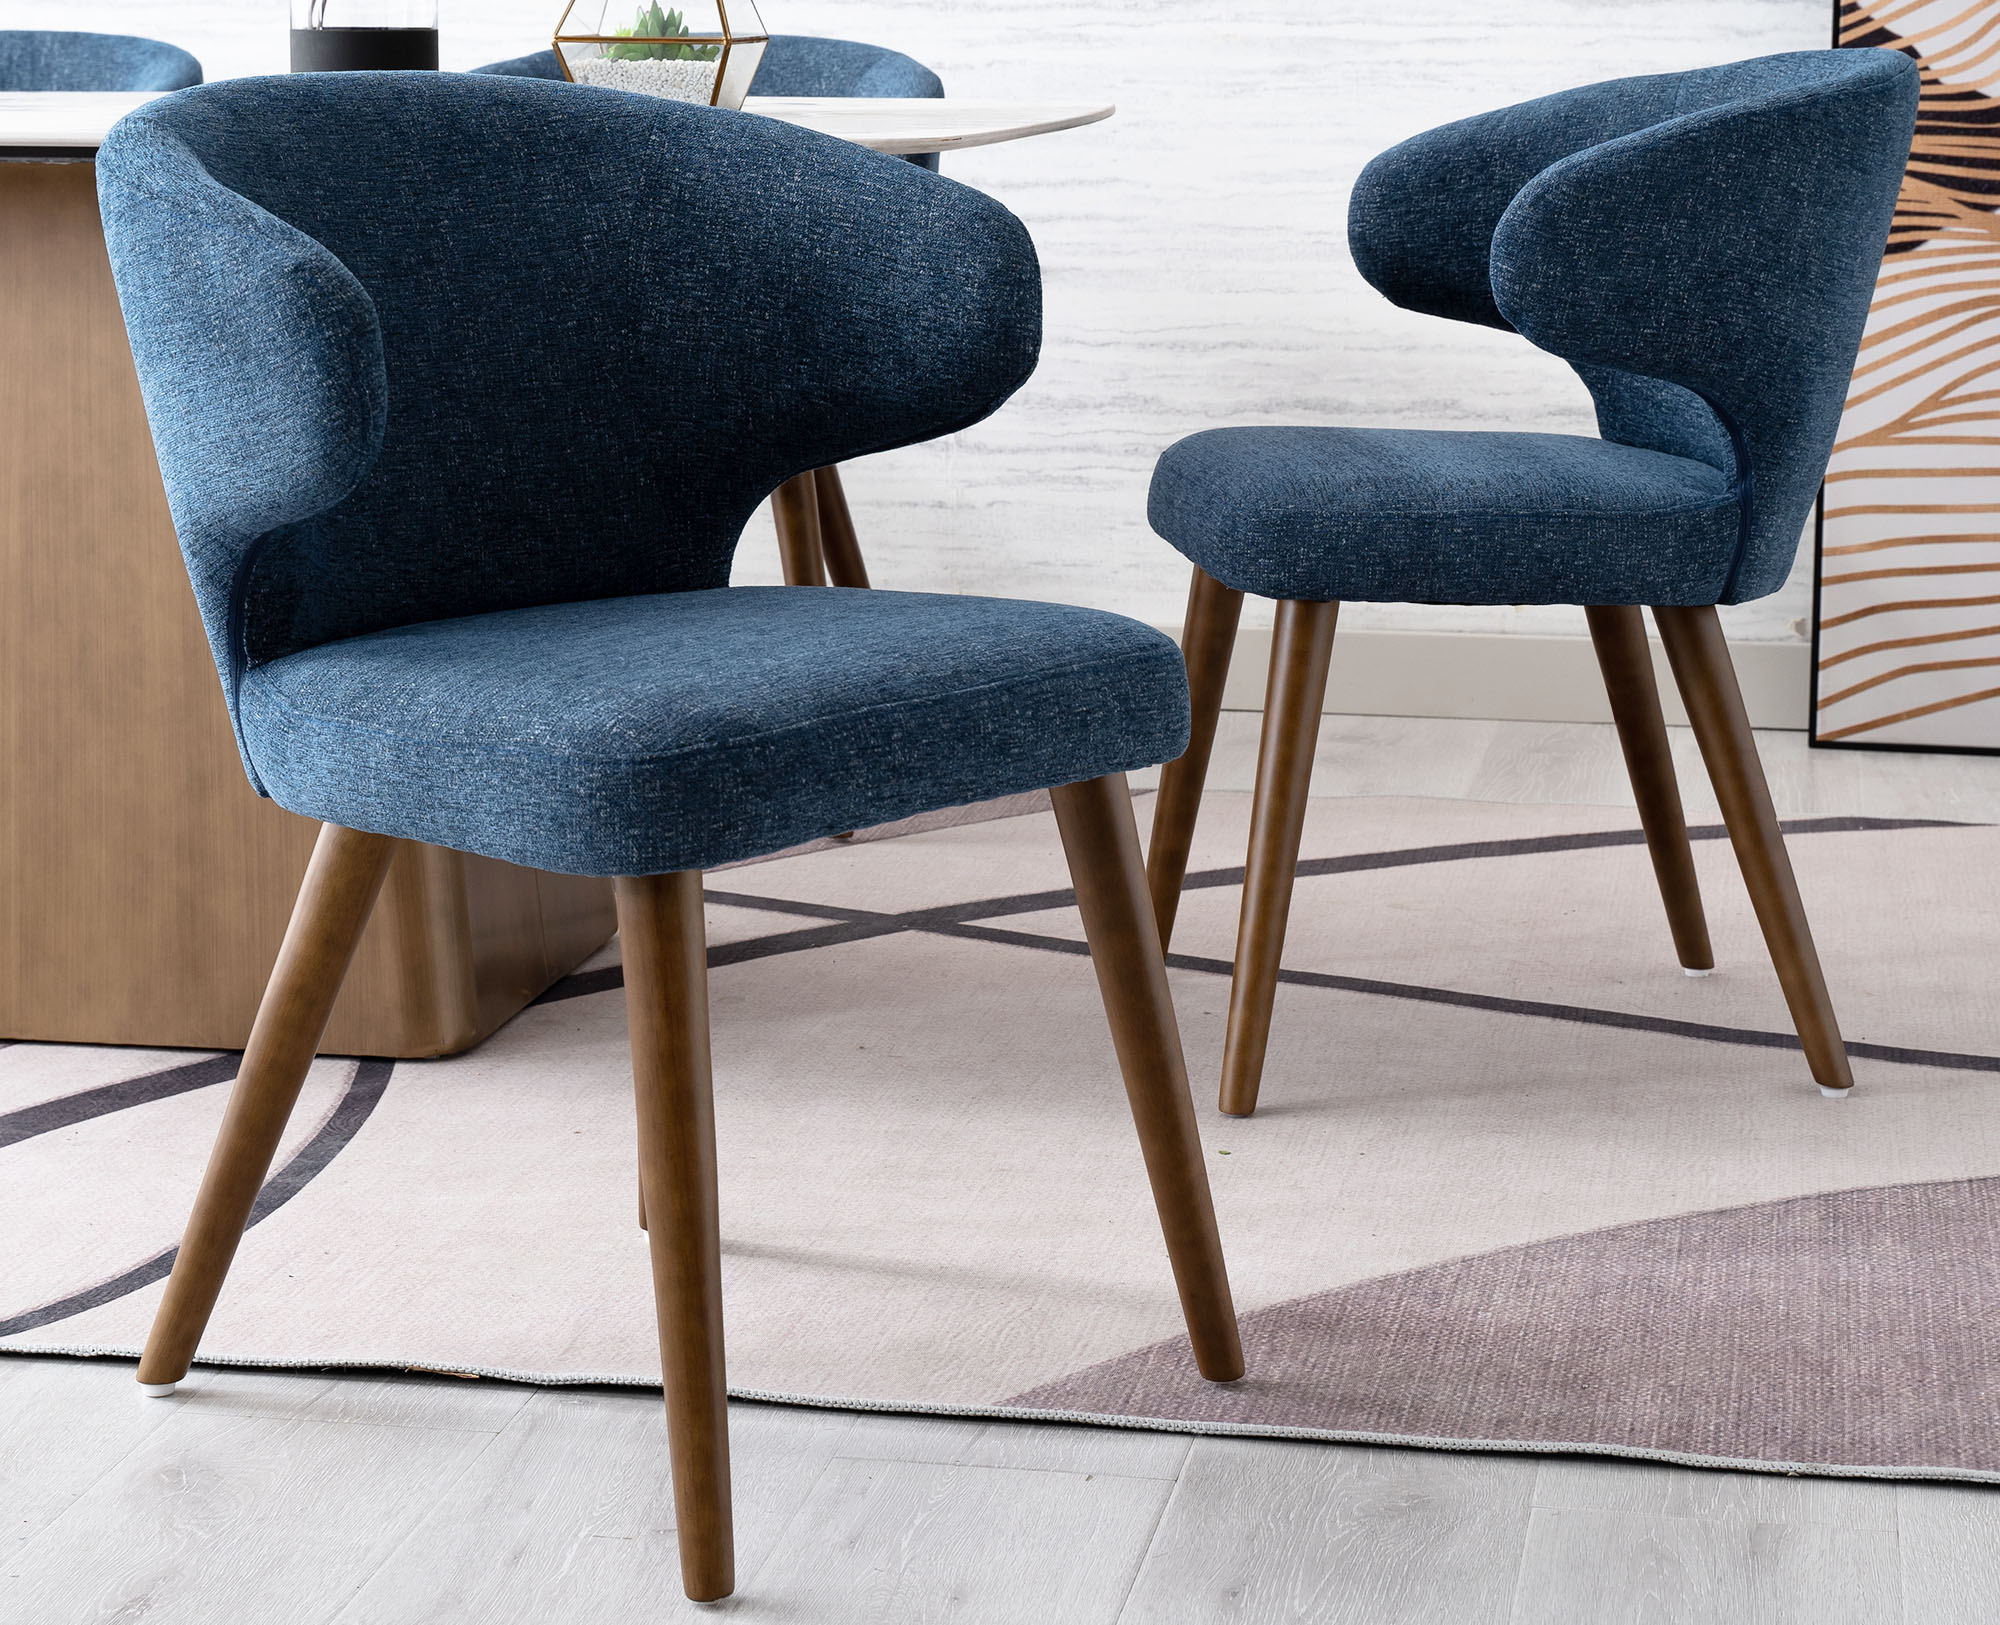 VESCASA Sherpa Modern Dining Chairs with Wood Legs, Upholstered Curved Back Side Chairs for Dining Room/Living Room